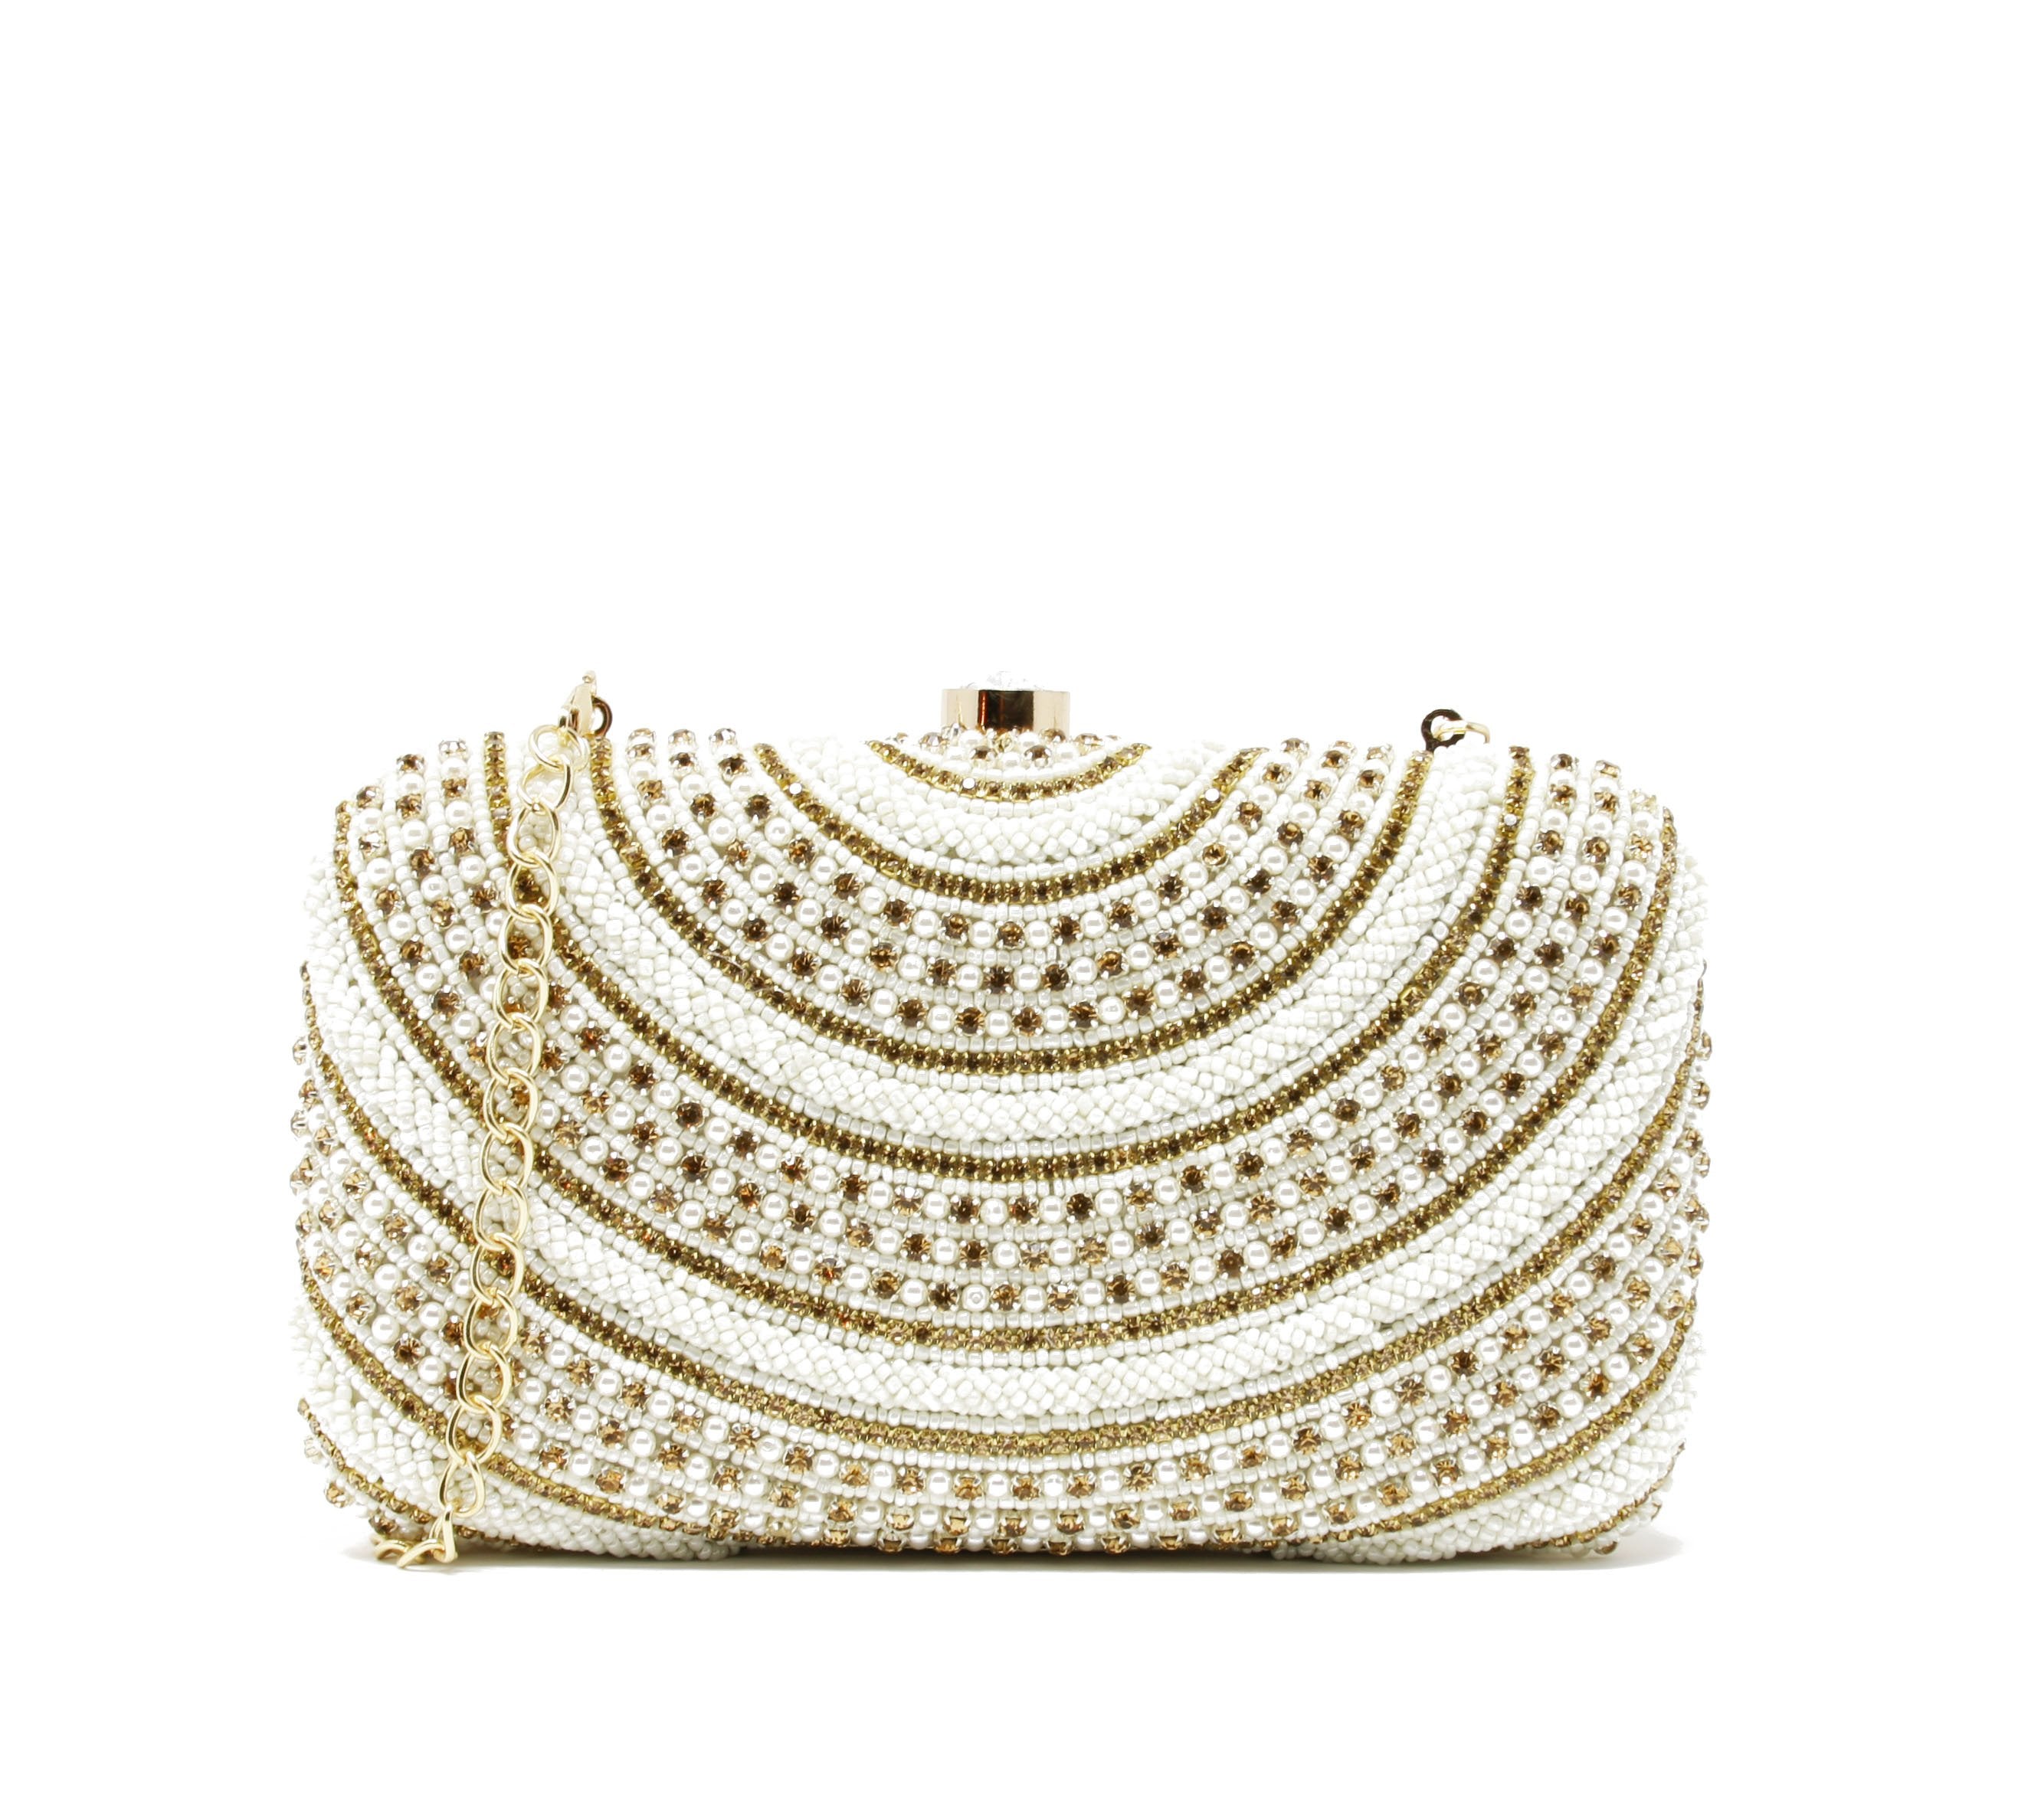 Ivory and white clutch with Gold chain strap for crossbody wear